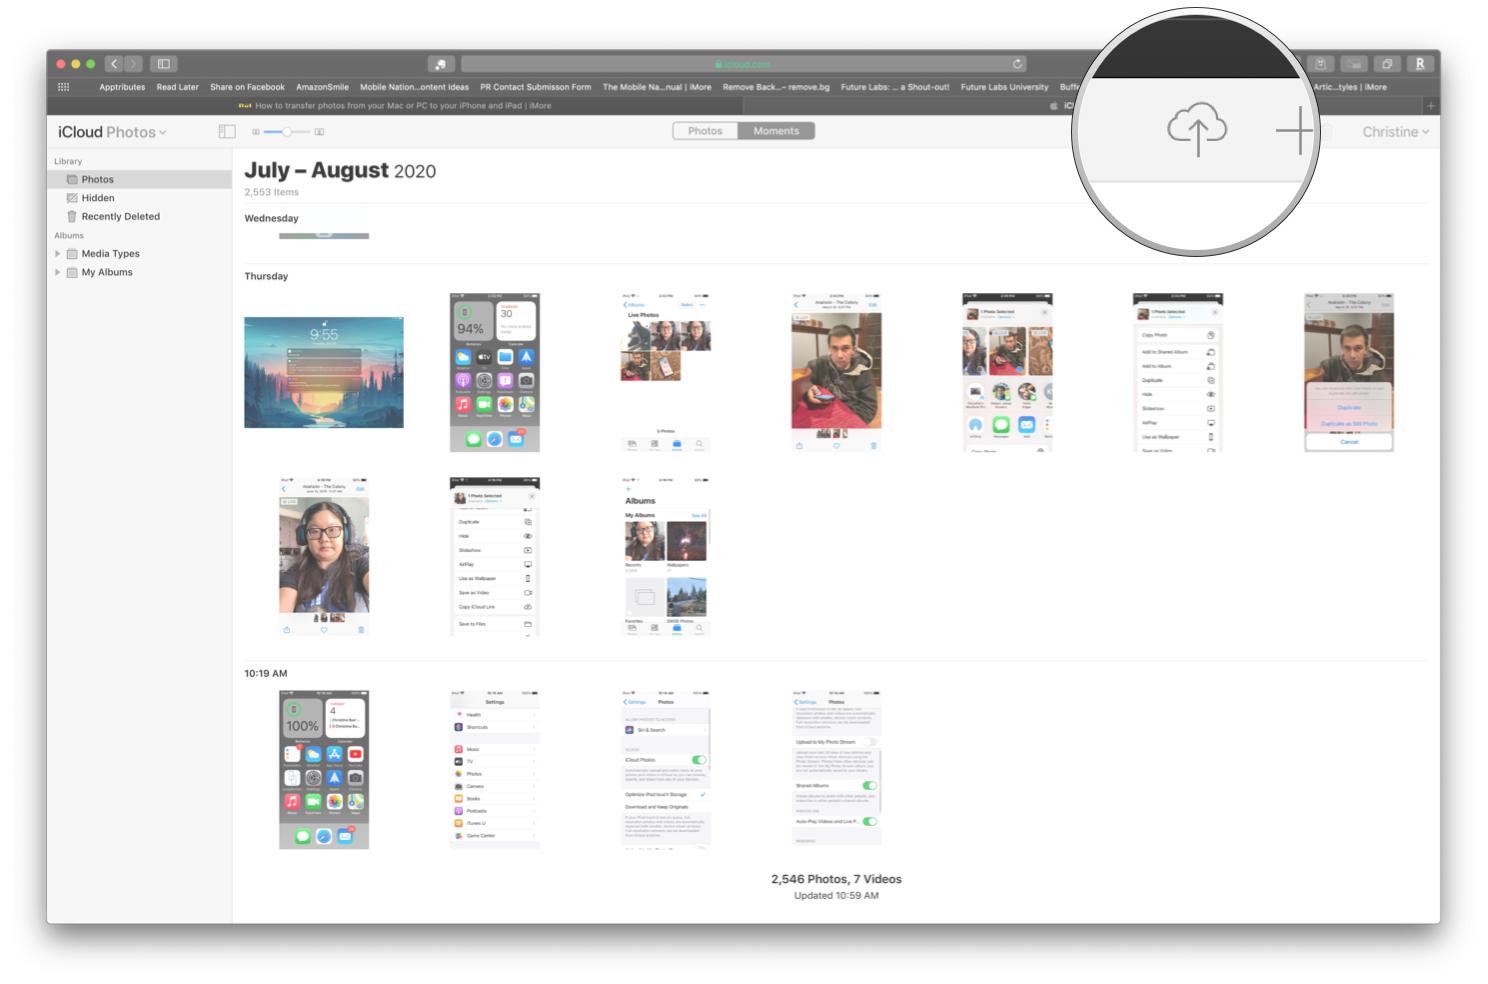 Upload your photos via web on iCloud.com by showing steps: Click on the Upload button at the top